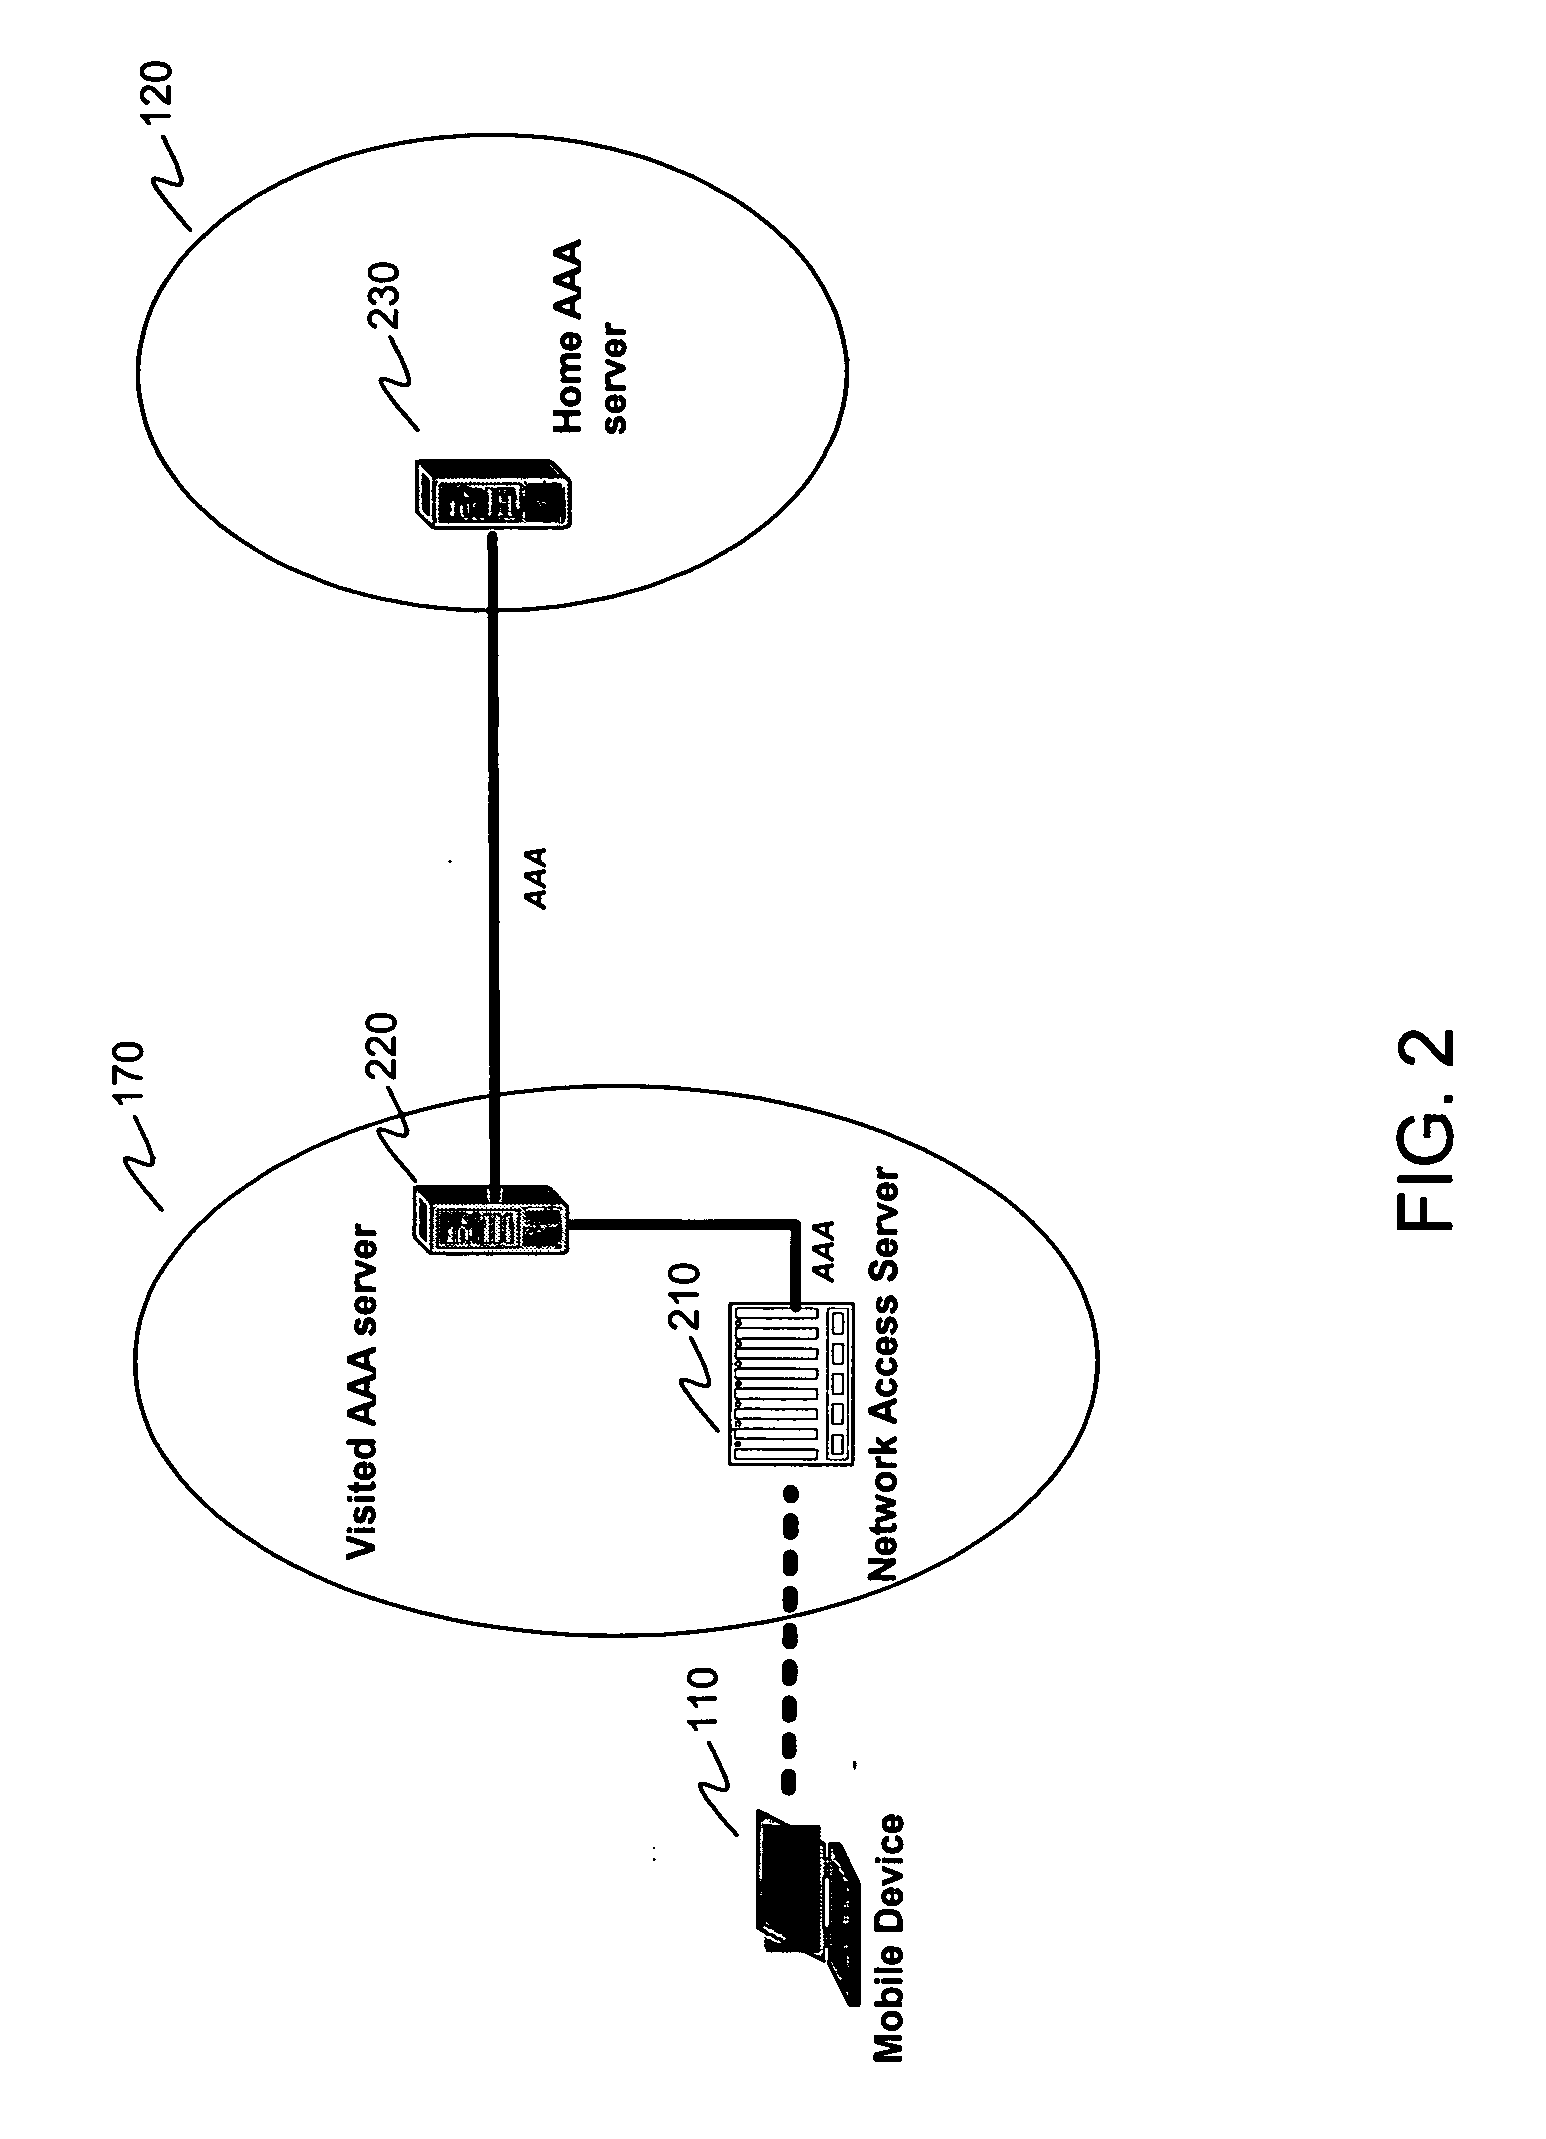 Systems and methods for subscriber profile management